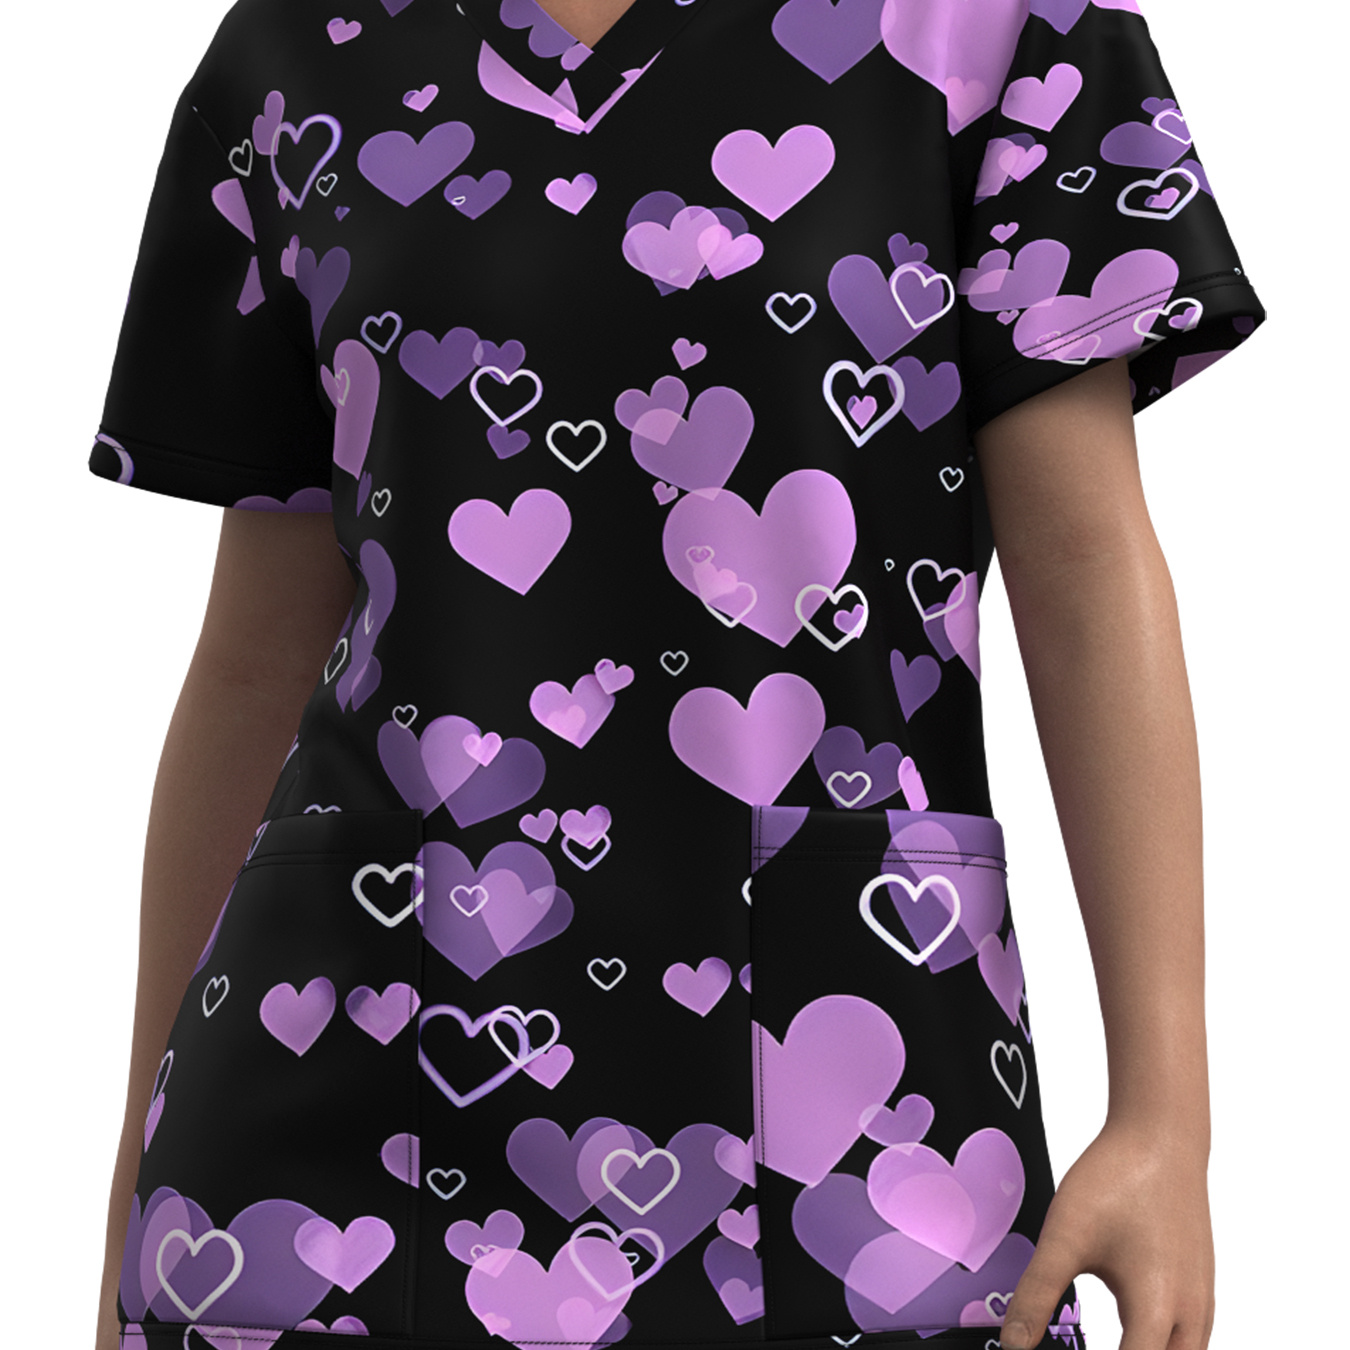 

Heart & Bow Print T-shirt, Casual V Neck Short Sleeve Top For Spring & Summer, Women's Clothing